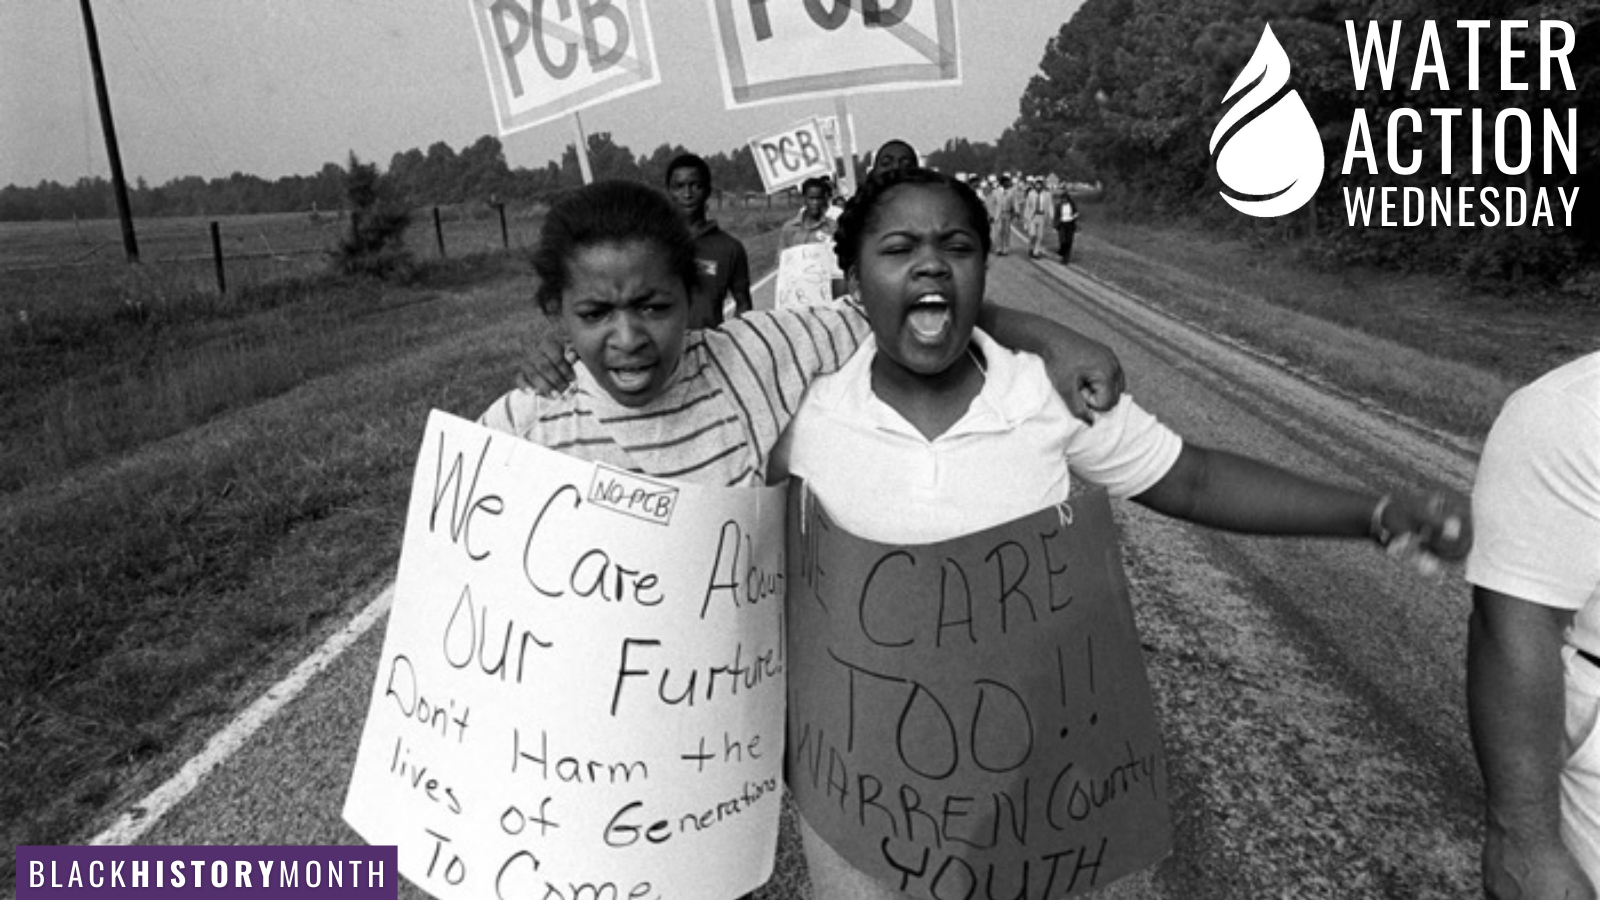 March and protest against in Warren, picture of two young Black girls with hadnmade signs "We Care About Our Future"